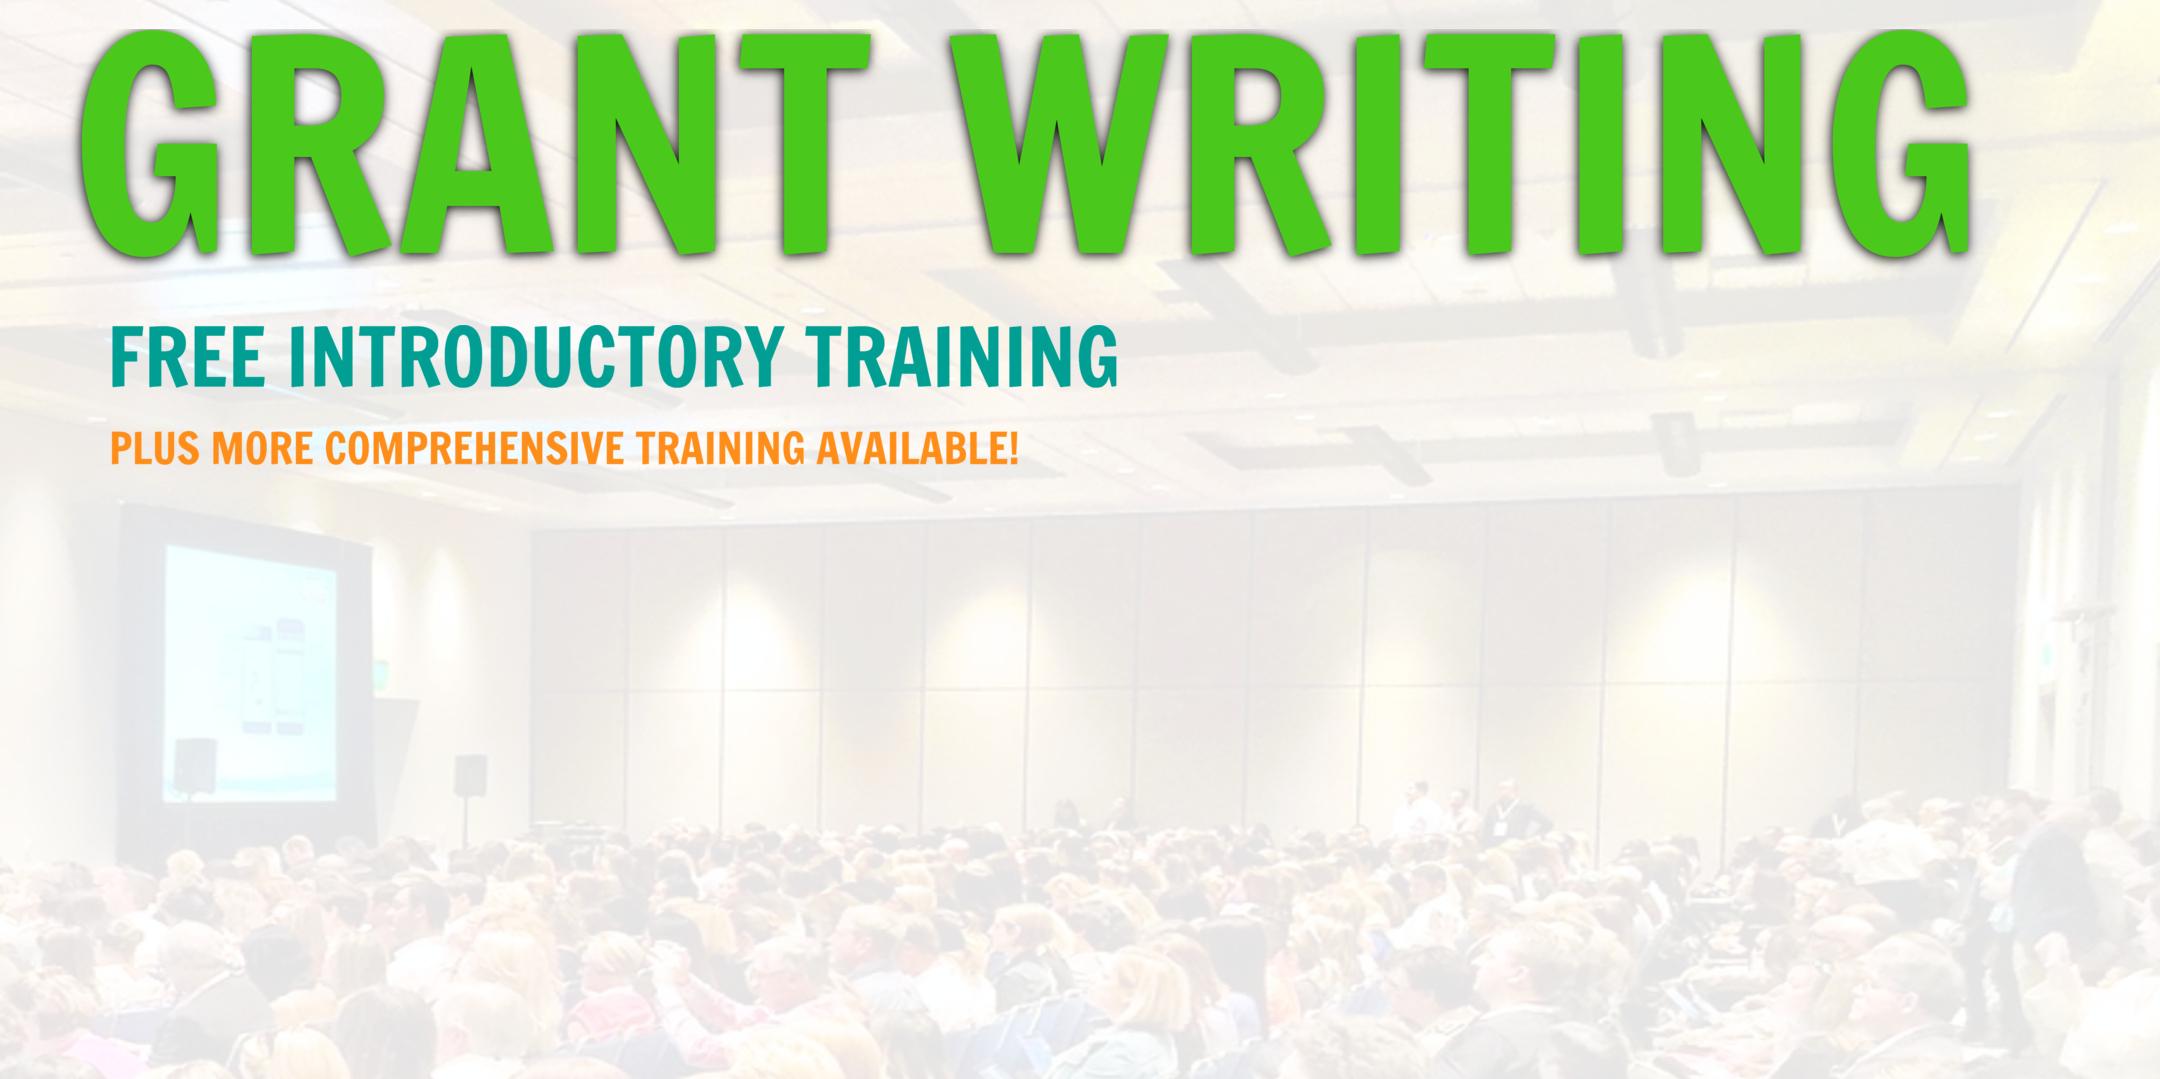 Grant Writing Introductory Training... Lancaster, California